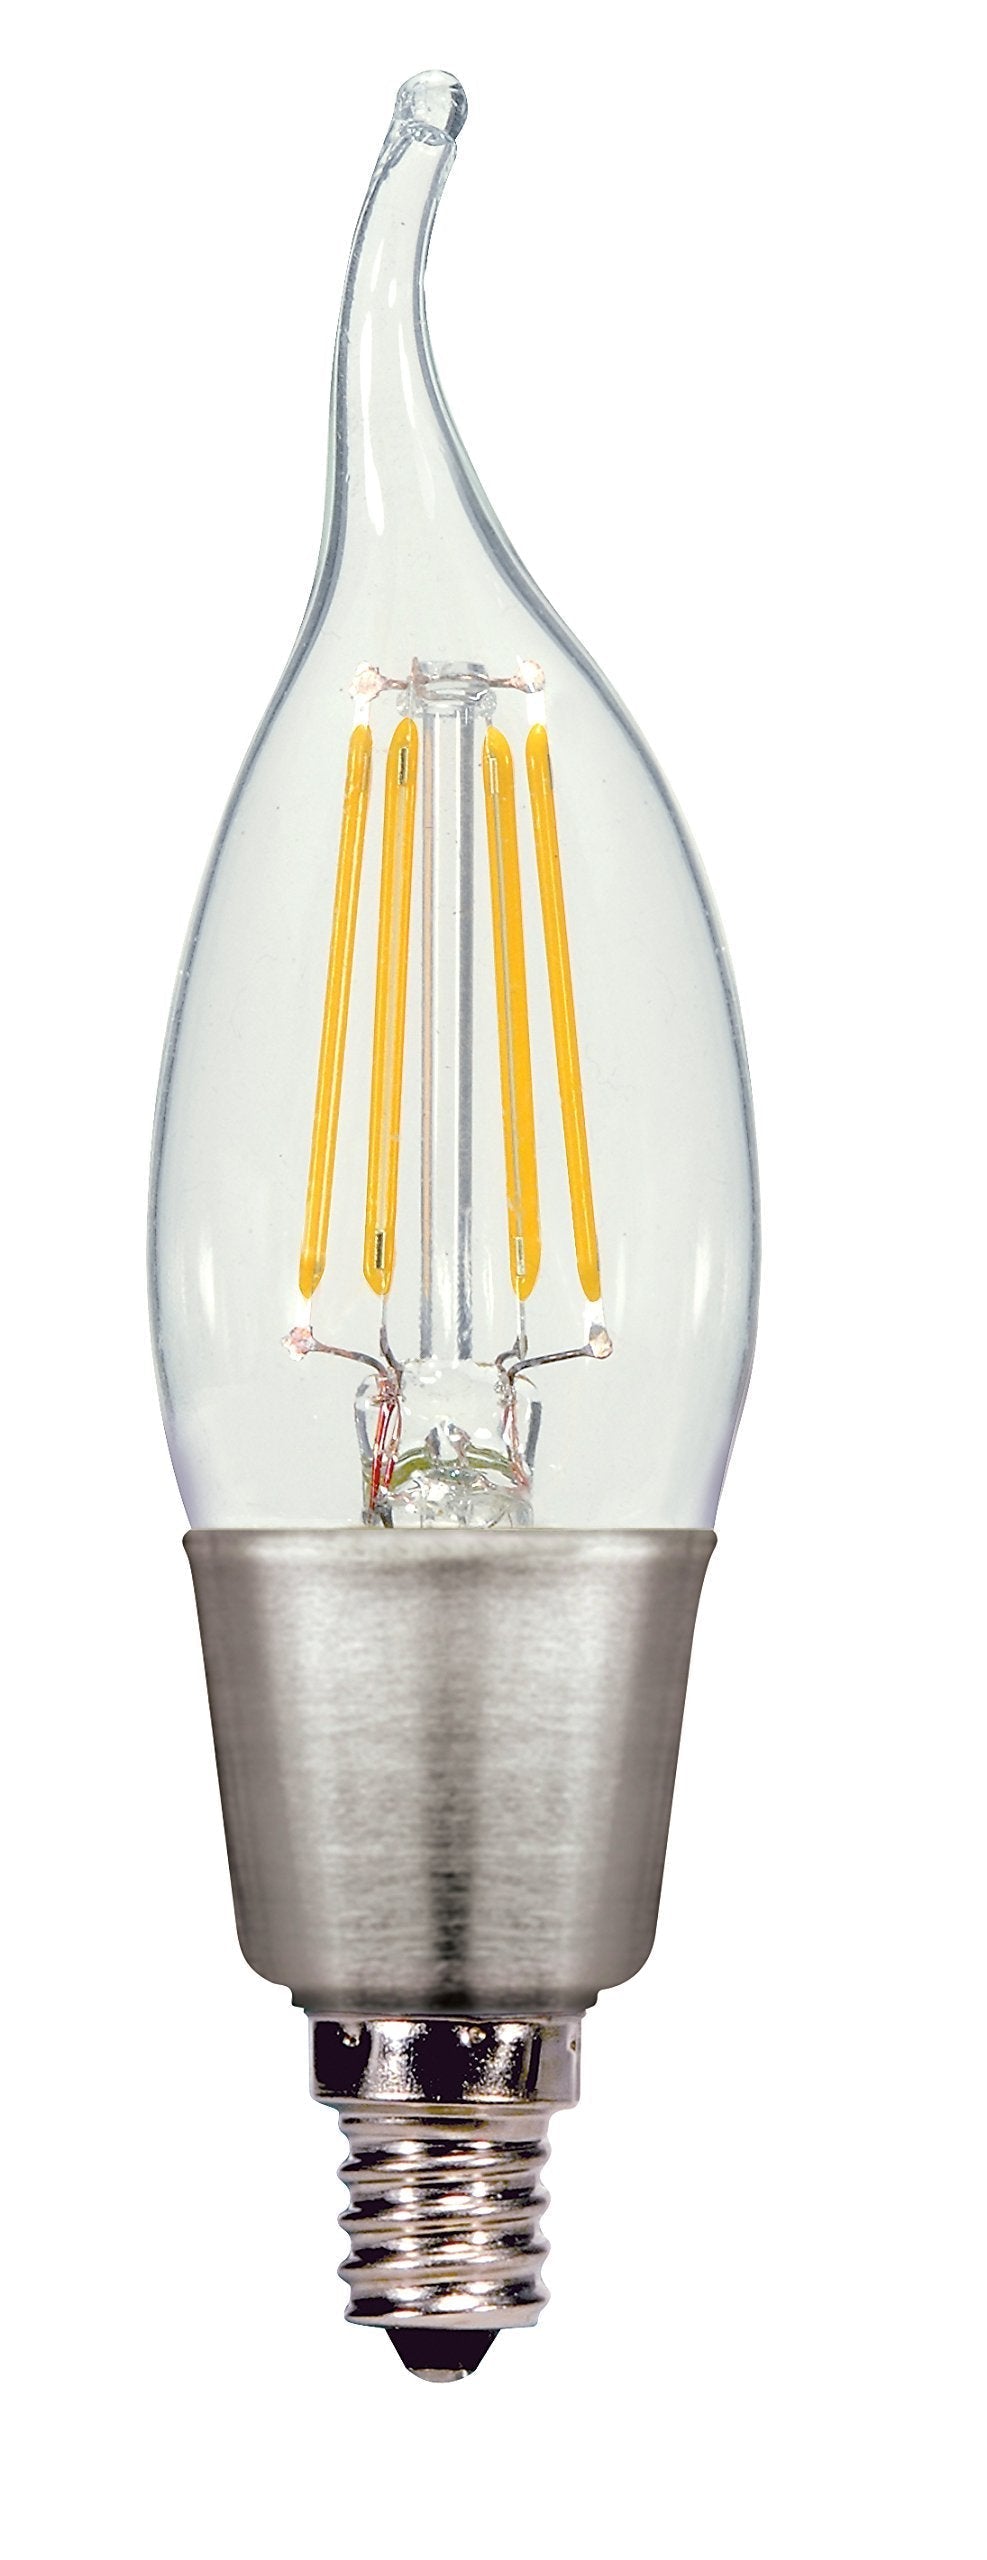 Satco S9574 Candelabra Bulb in Light Finish, 5.00 inches, 450Lm/Candelabra Base, Decorative Bent Tip CA11-Shape